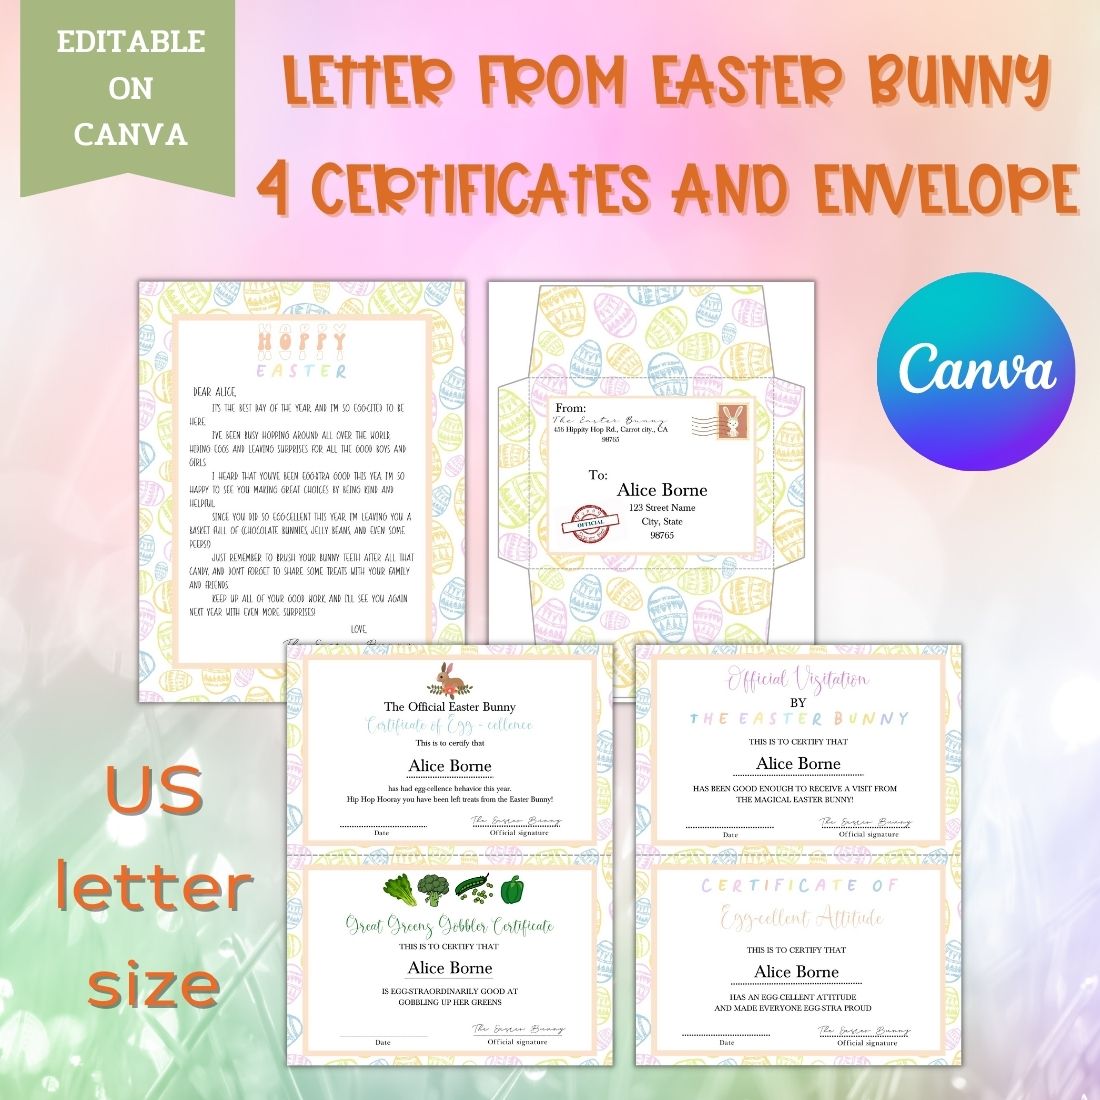 Editable Easter Bunny Letter & Certificates cover image.